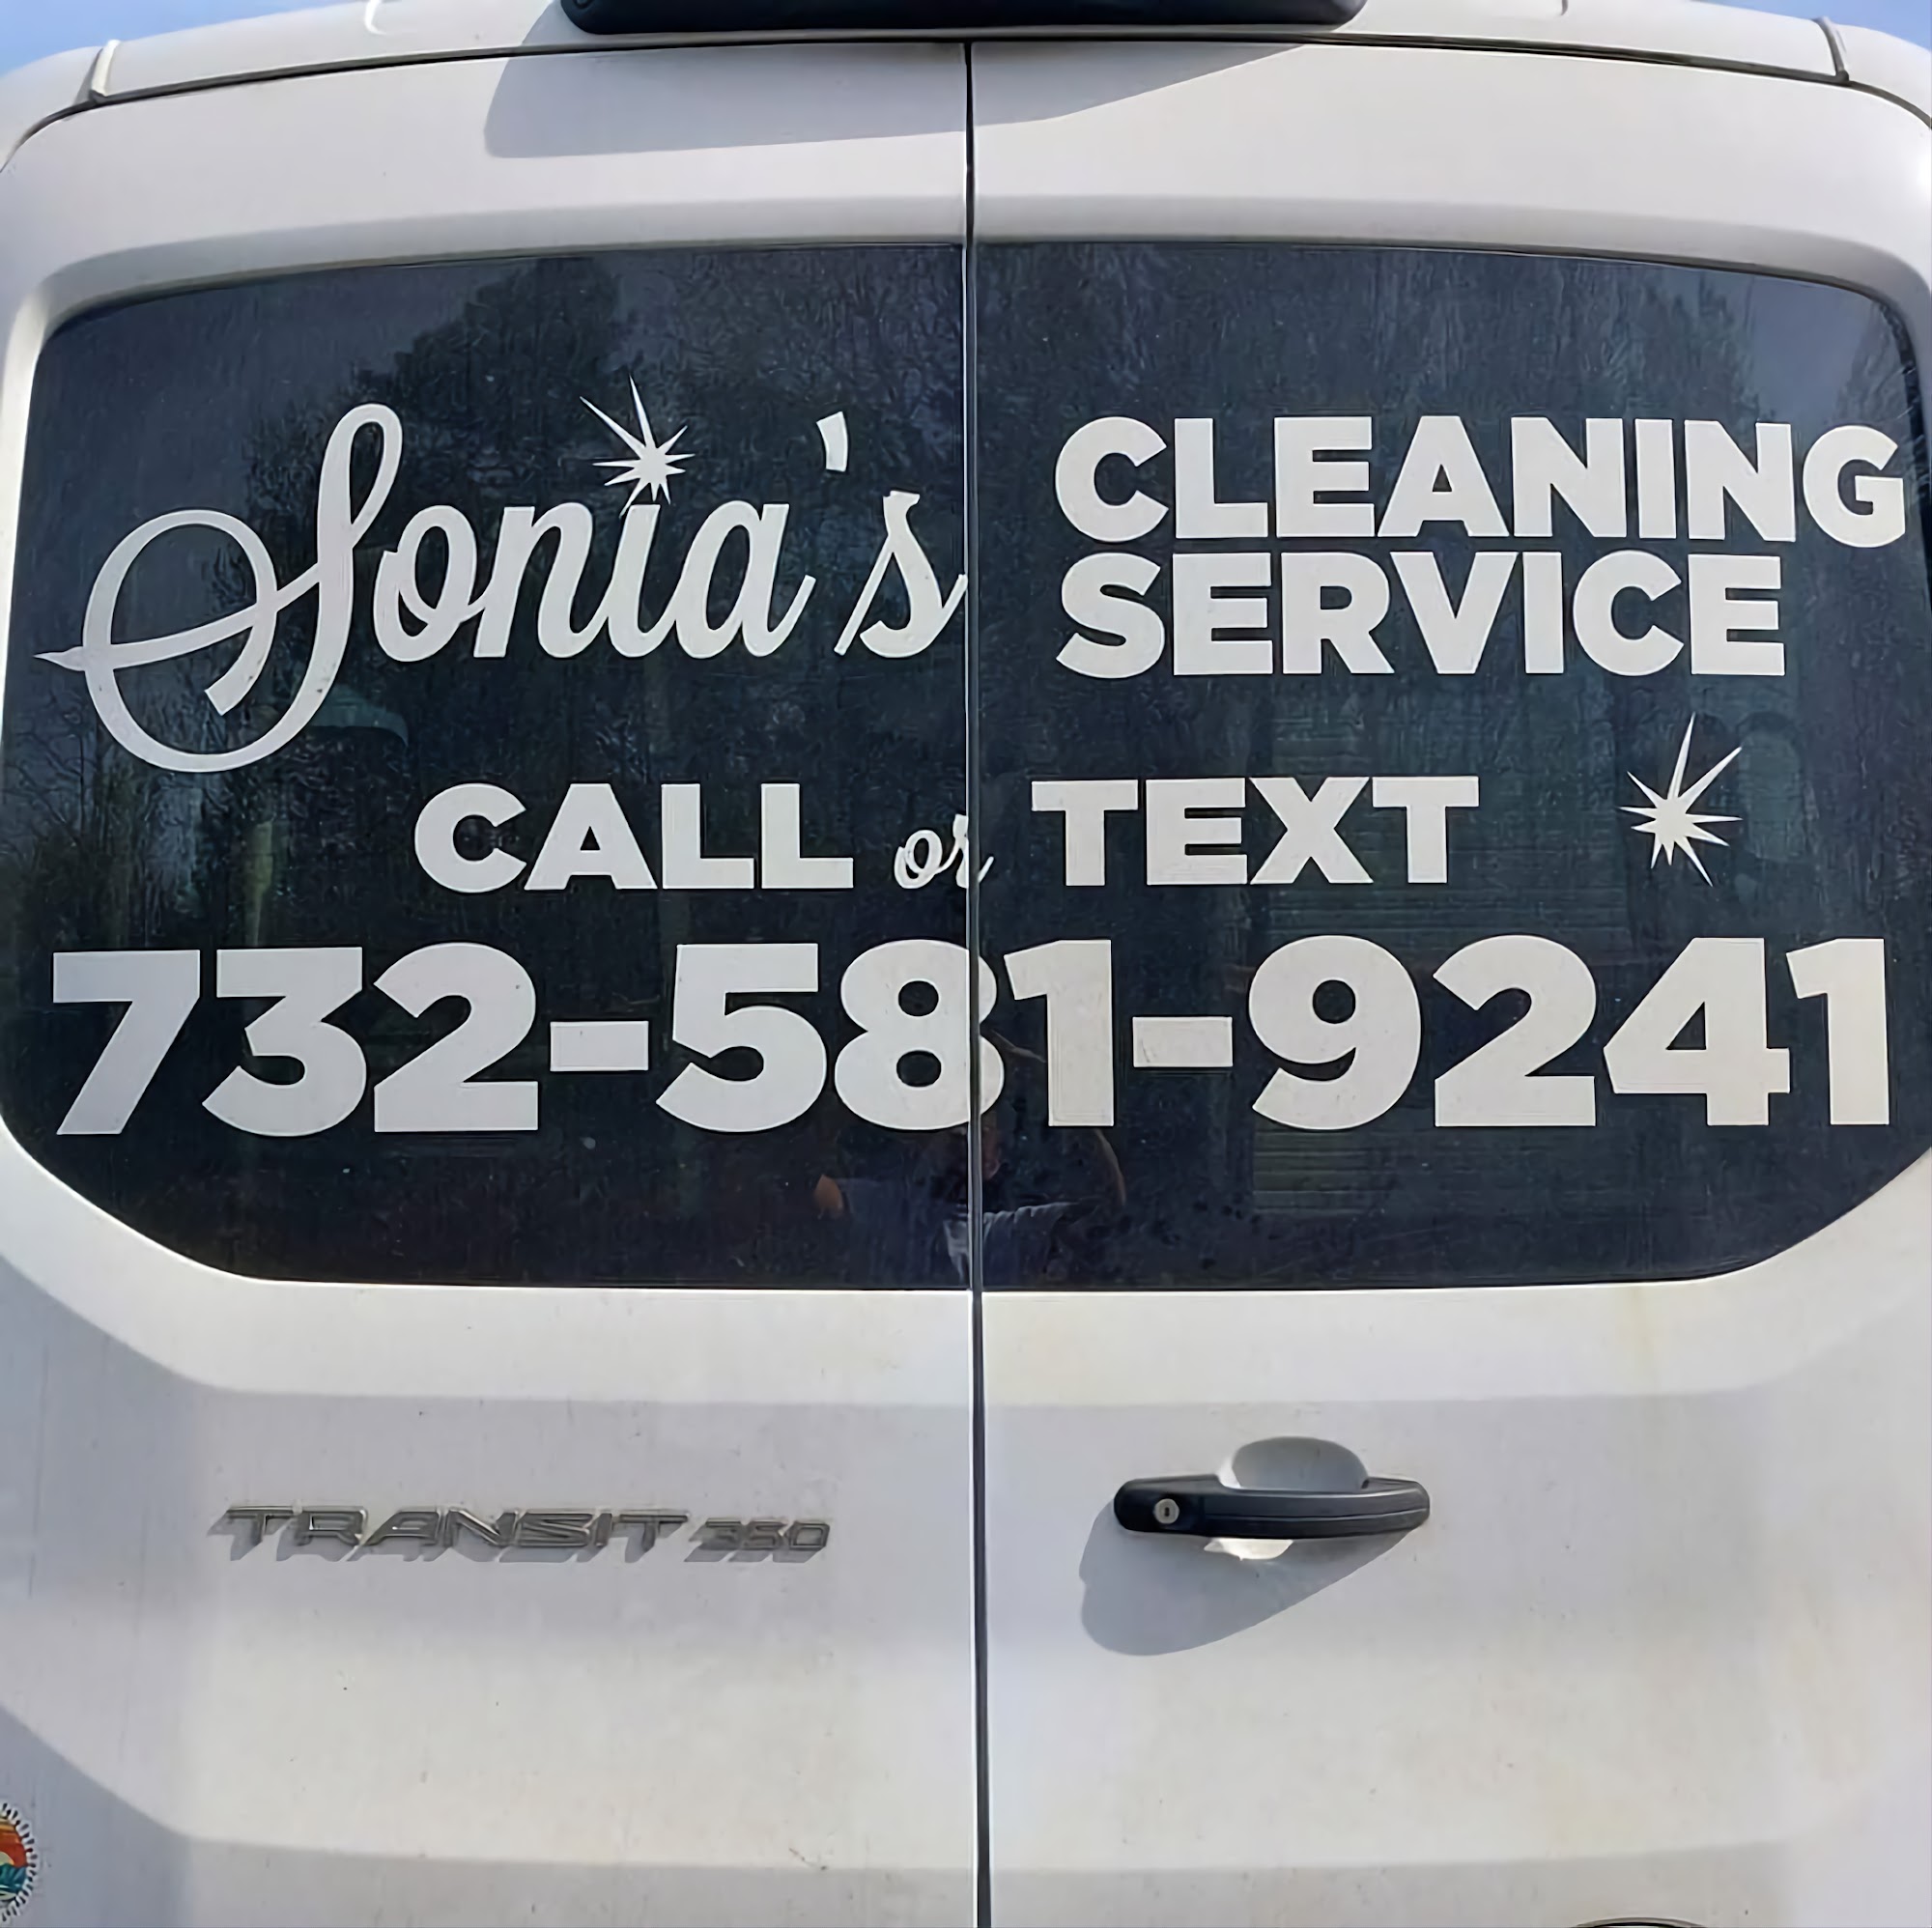 Sonia's cleaning service